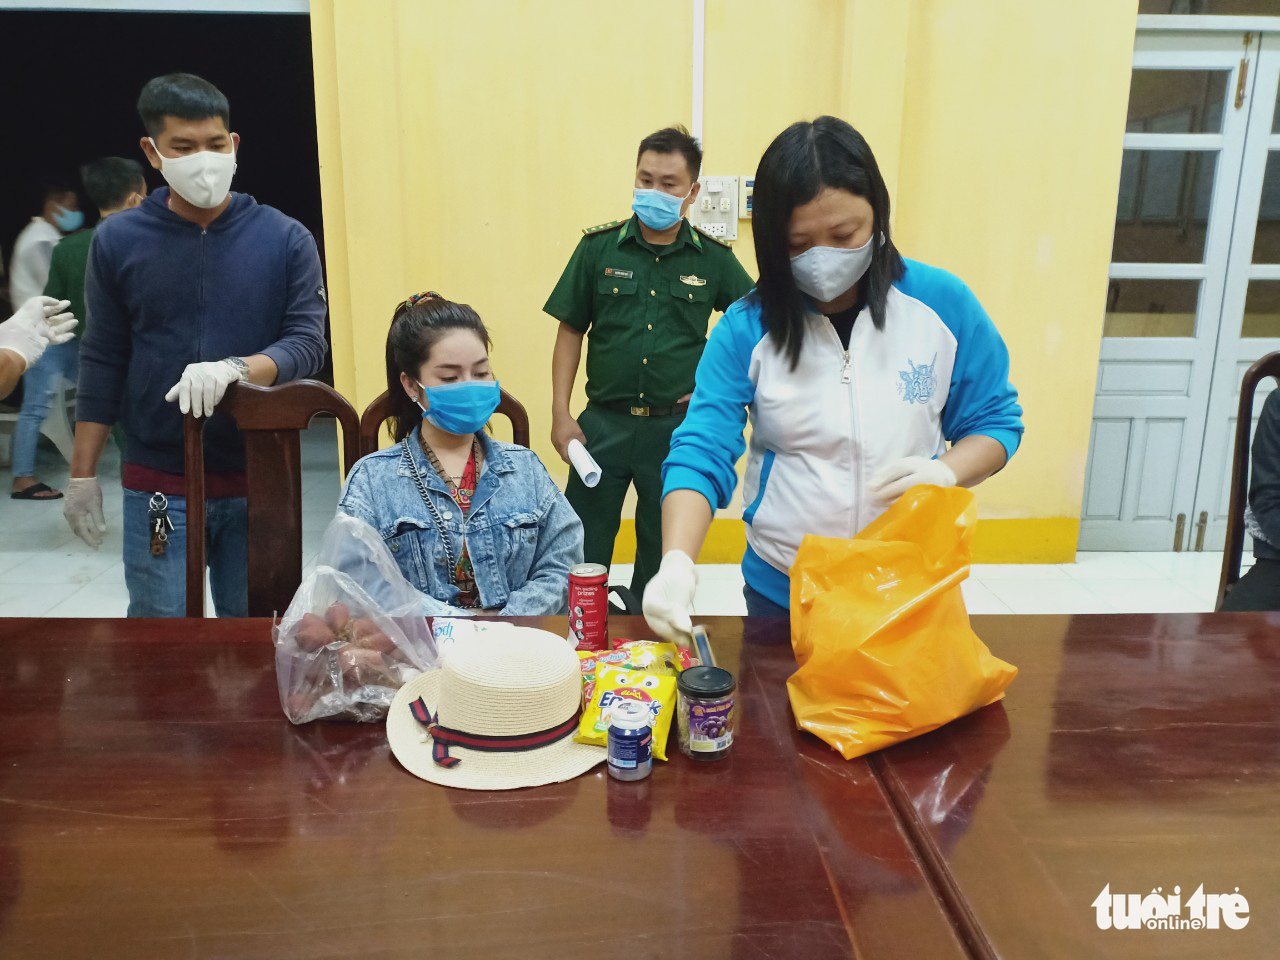 Competent authorities inspect the belongings of individuals who illegally entered An Giang Province, Vietnam on July 7, 2020. Photo: Chien Khu / Tuoi Tre